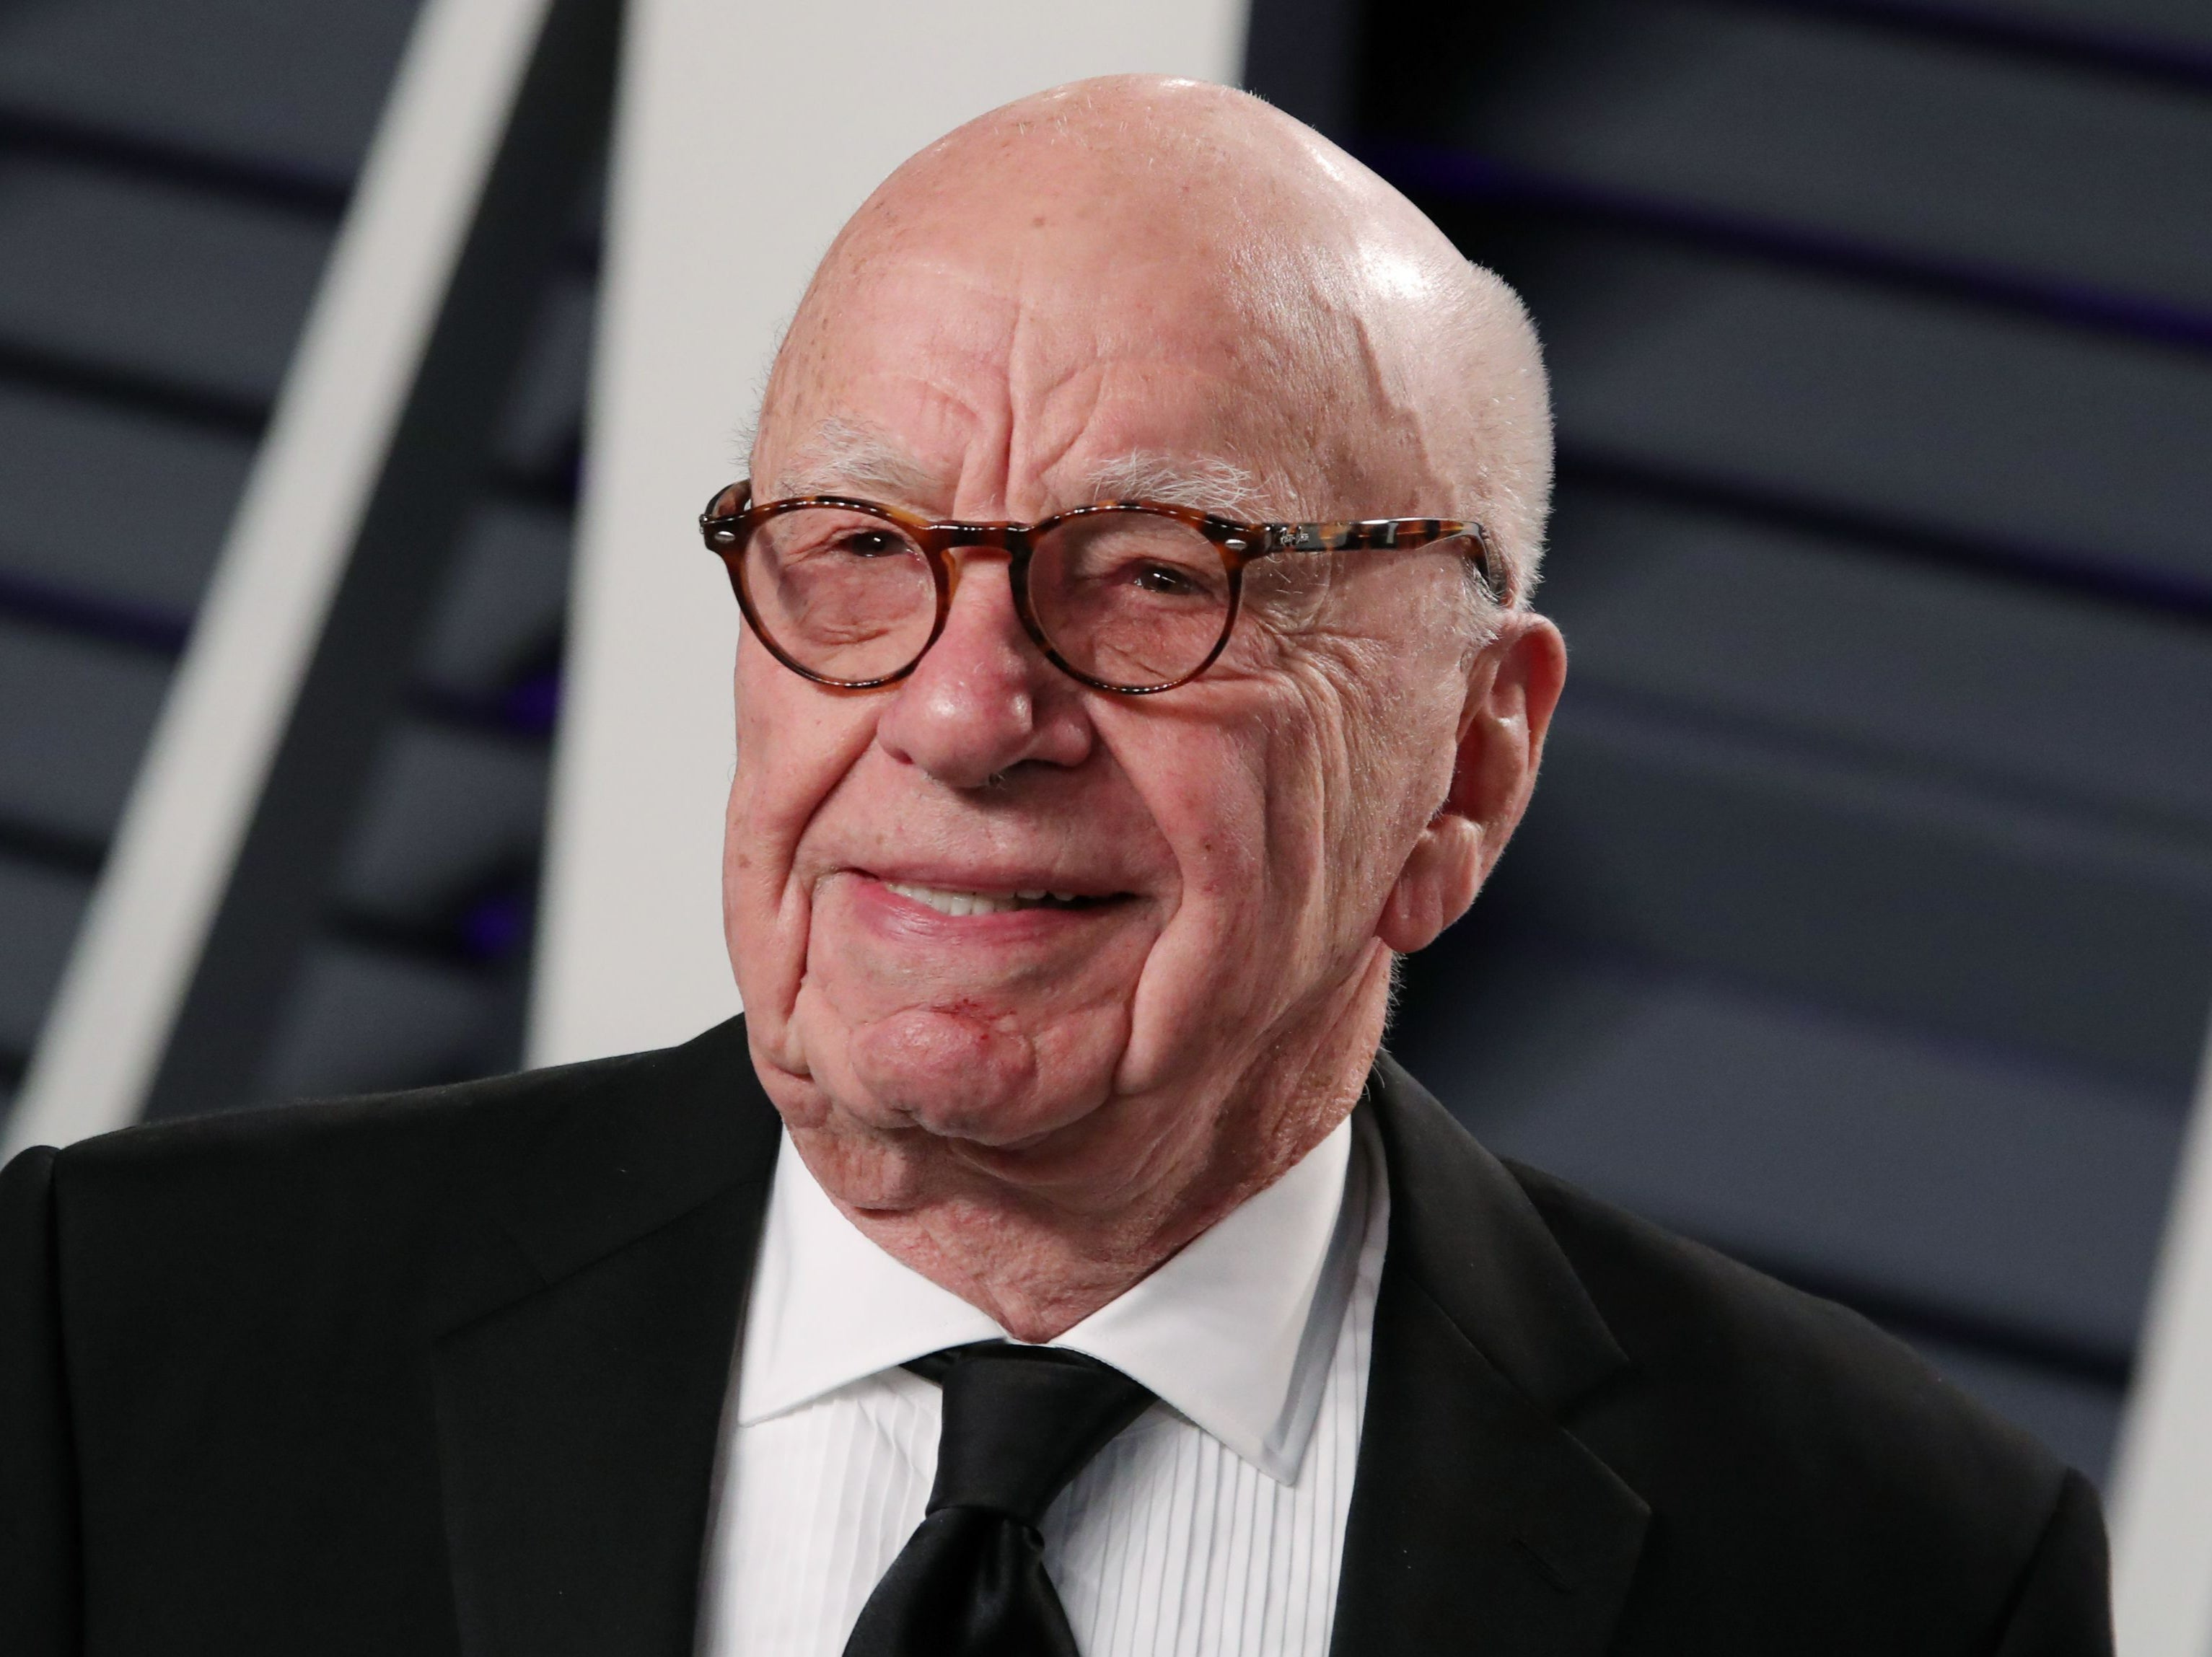 Rupert Murdoch was due to be repaid $125m in restitution